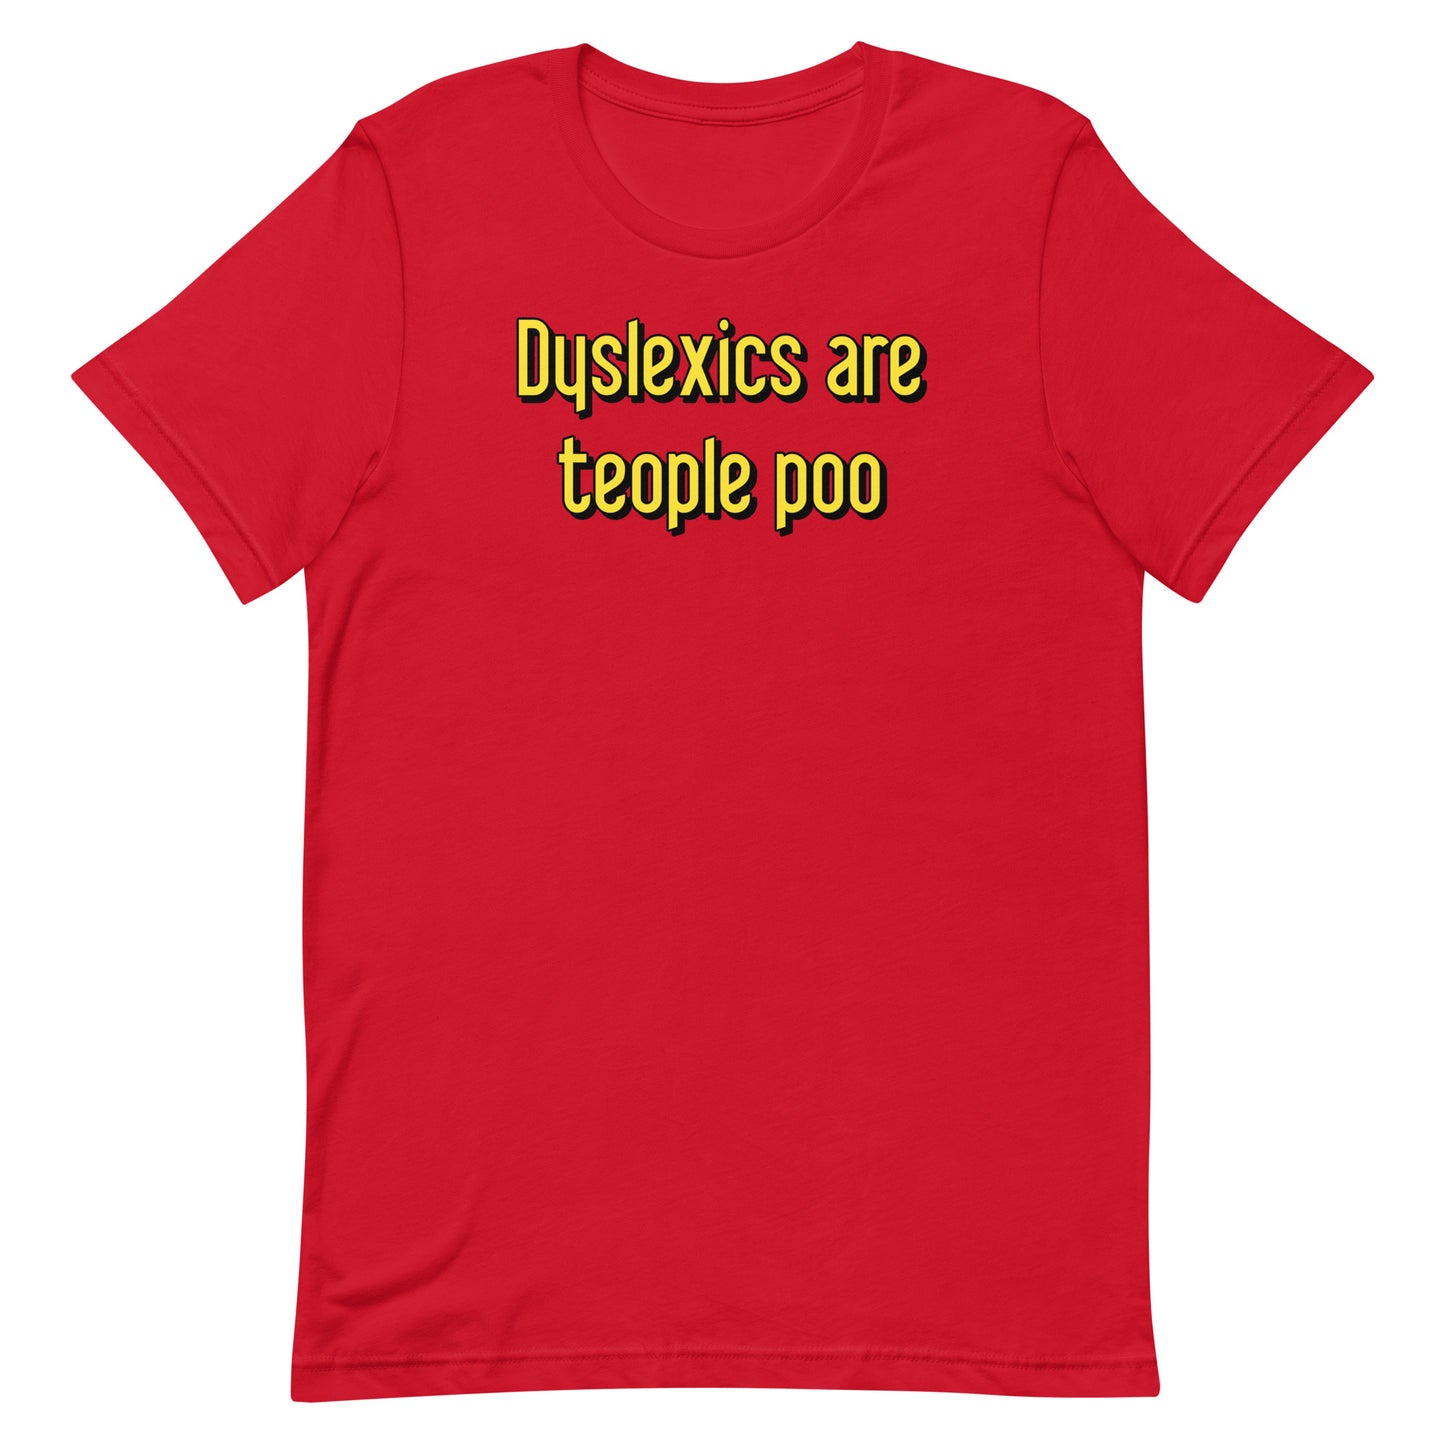 Dyslexics are teople poo Men's Signature Tee